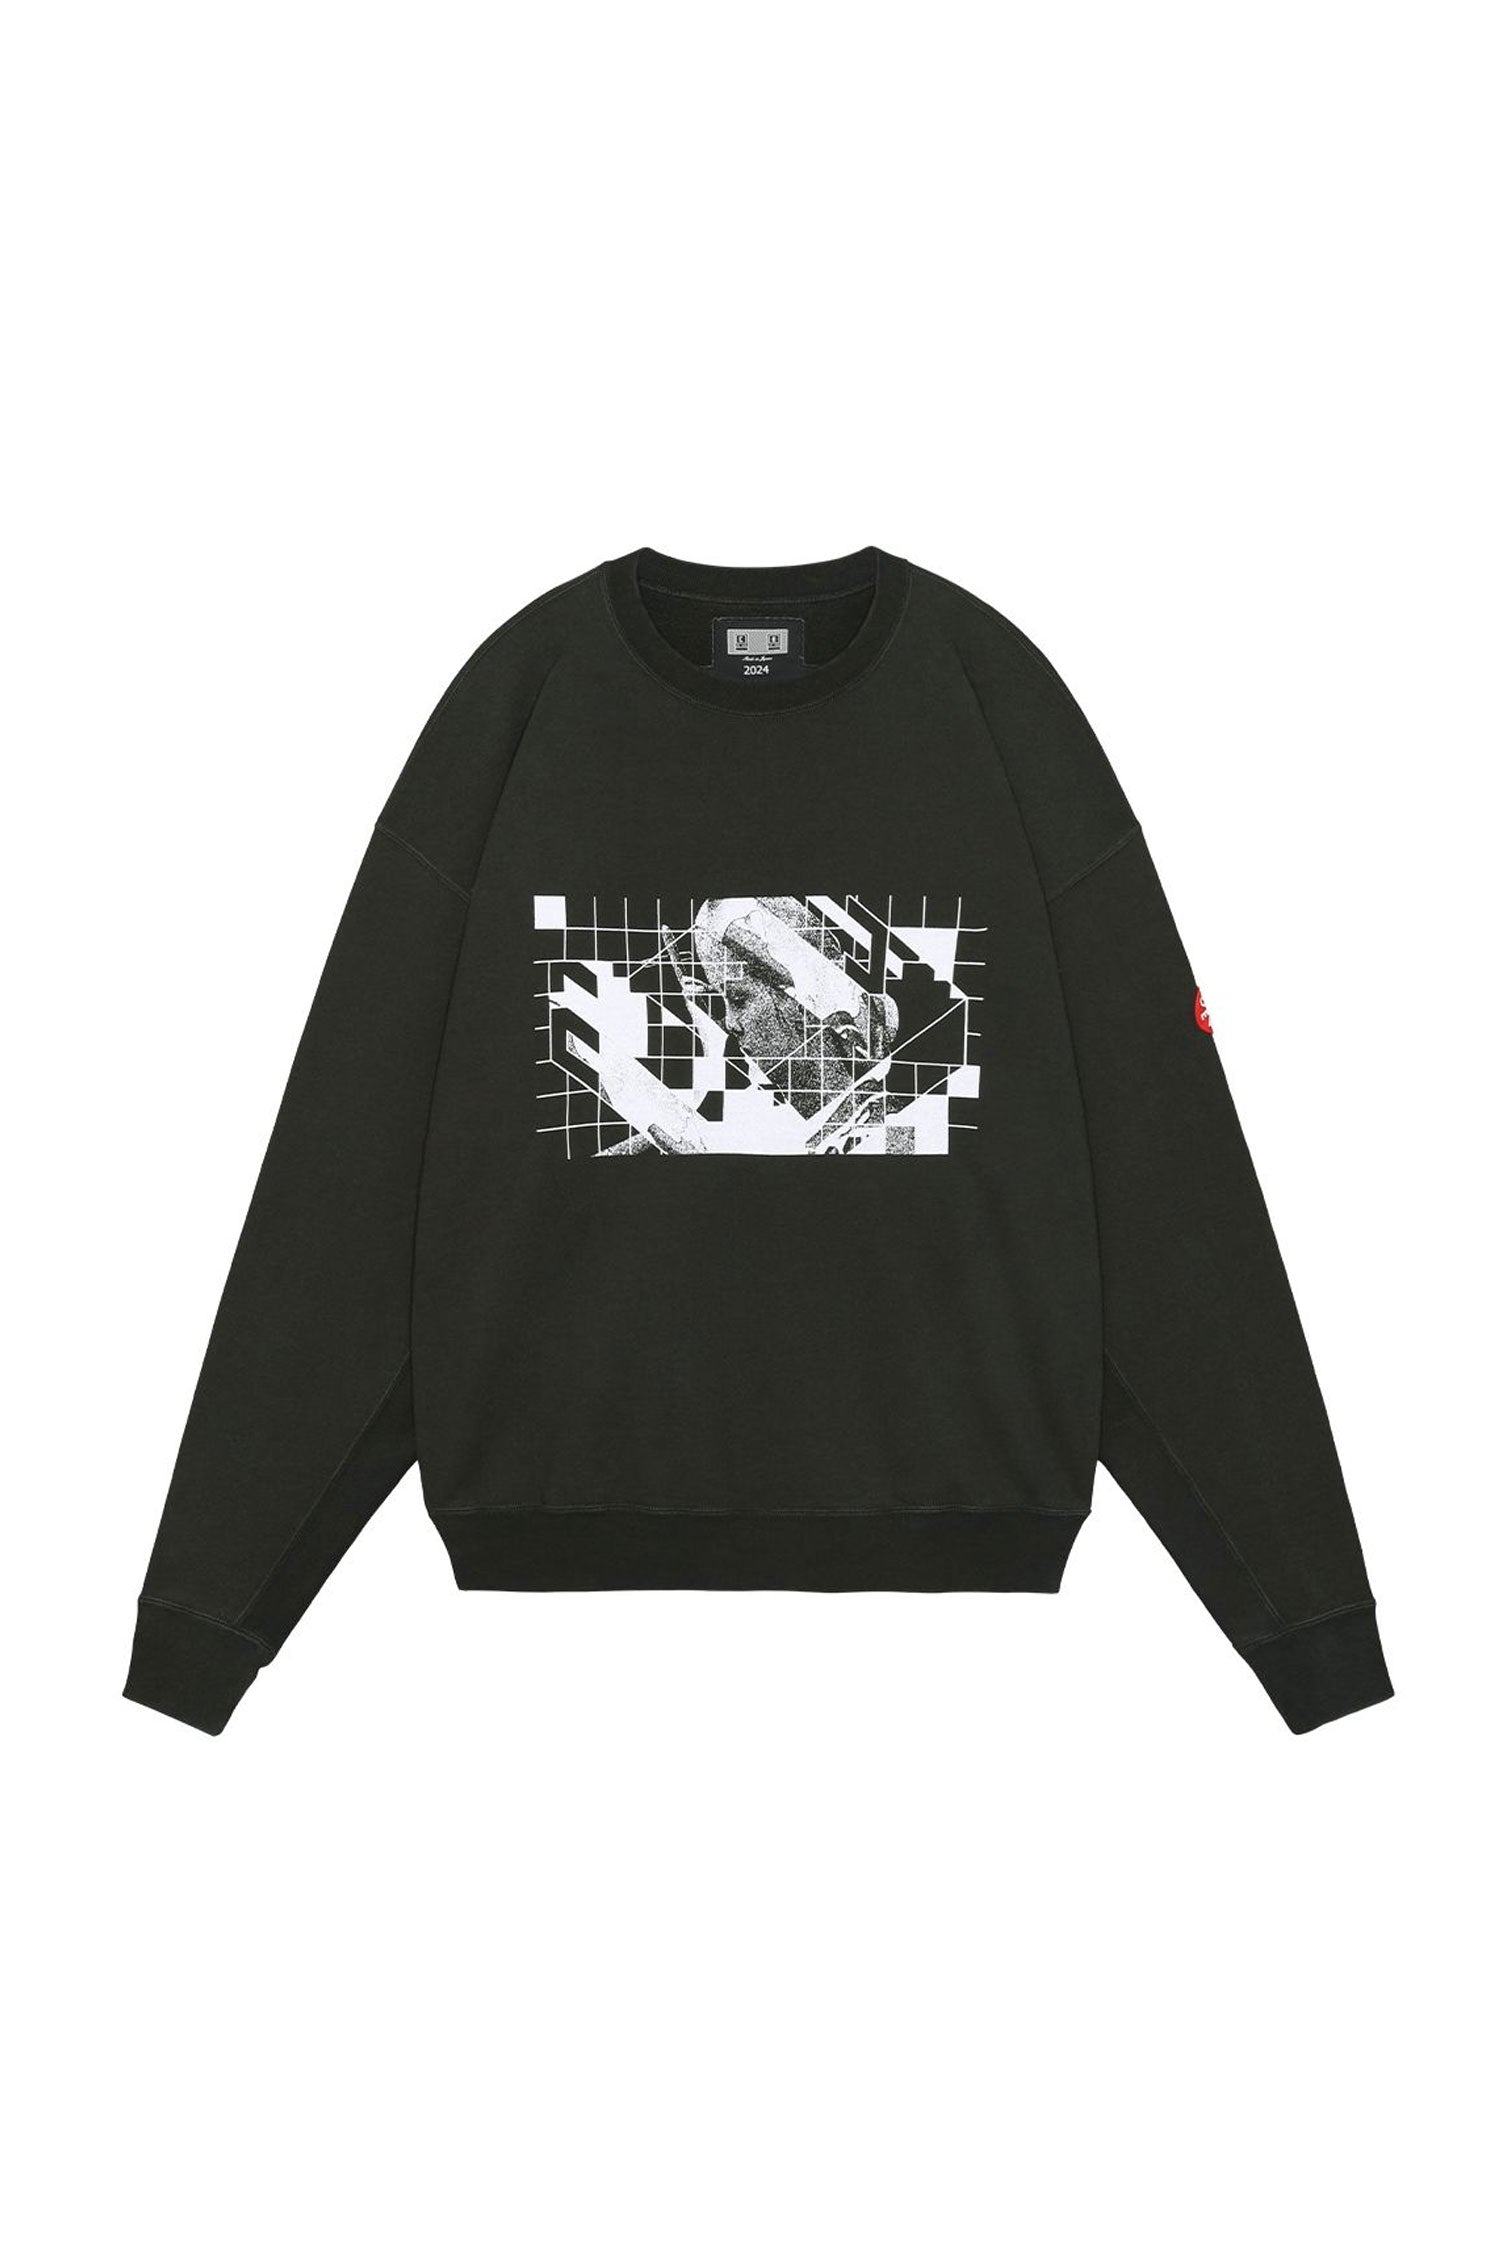 The CAV EMPT - WASHED DIMENSIONS CREW NECK  available online with global shipping, and in PAM Stores Melbourne and Sydney.